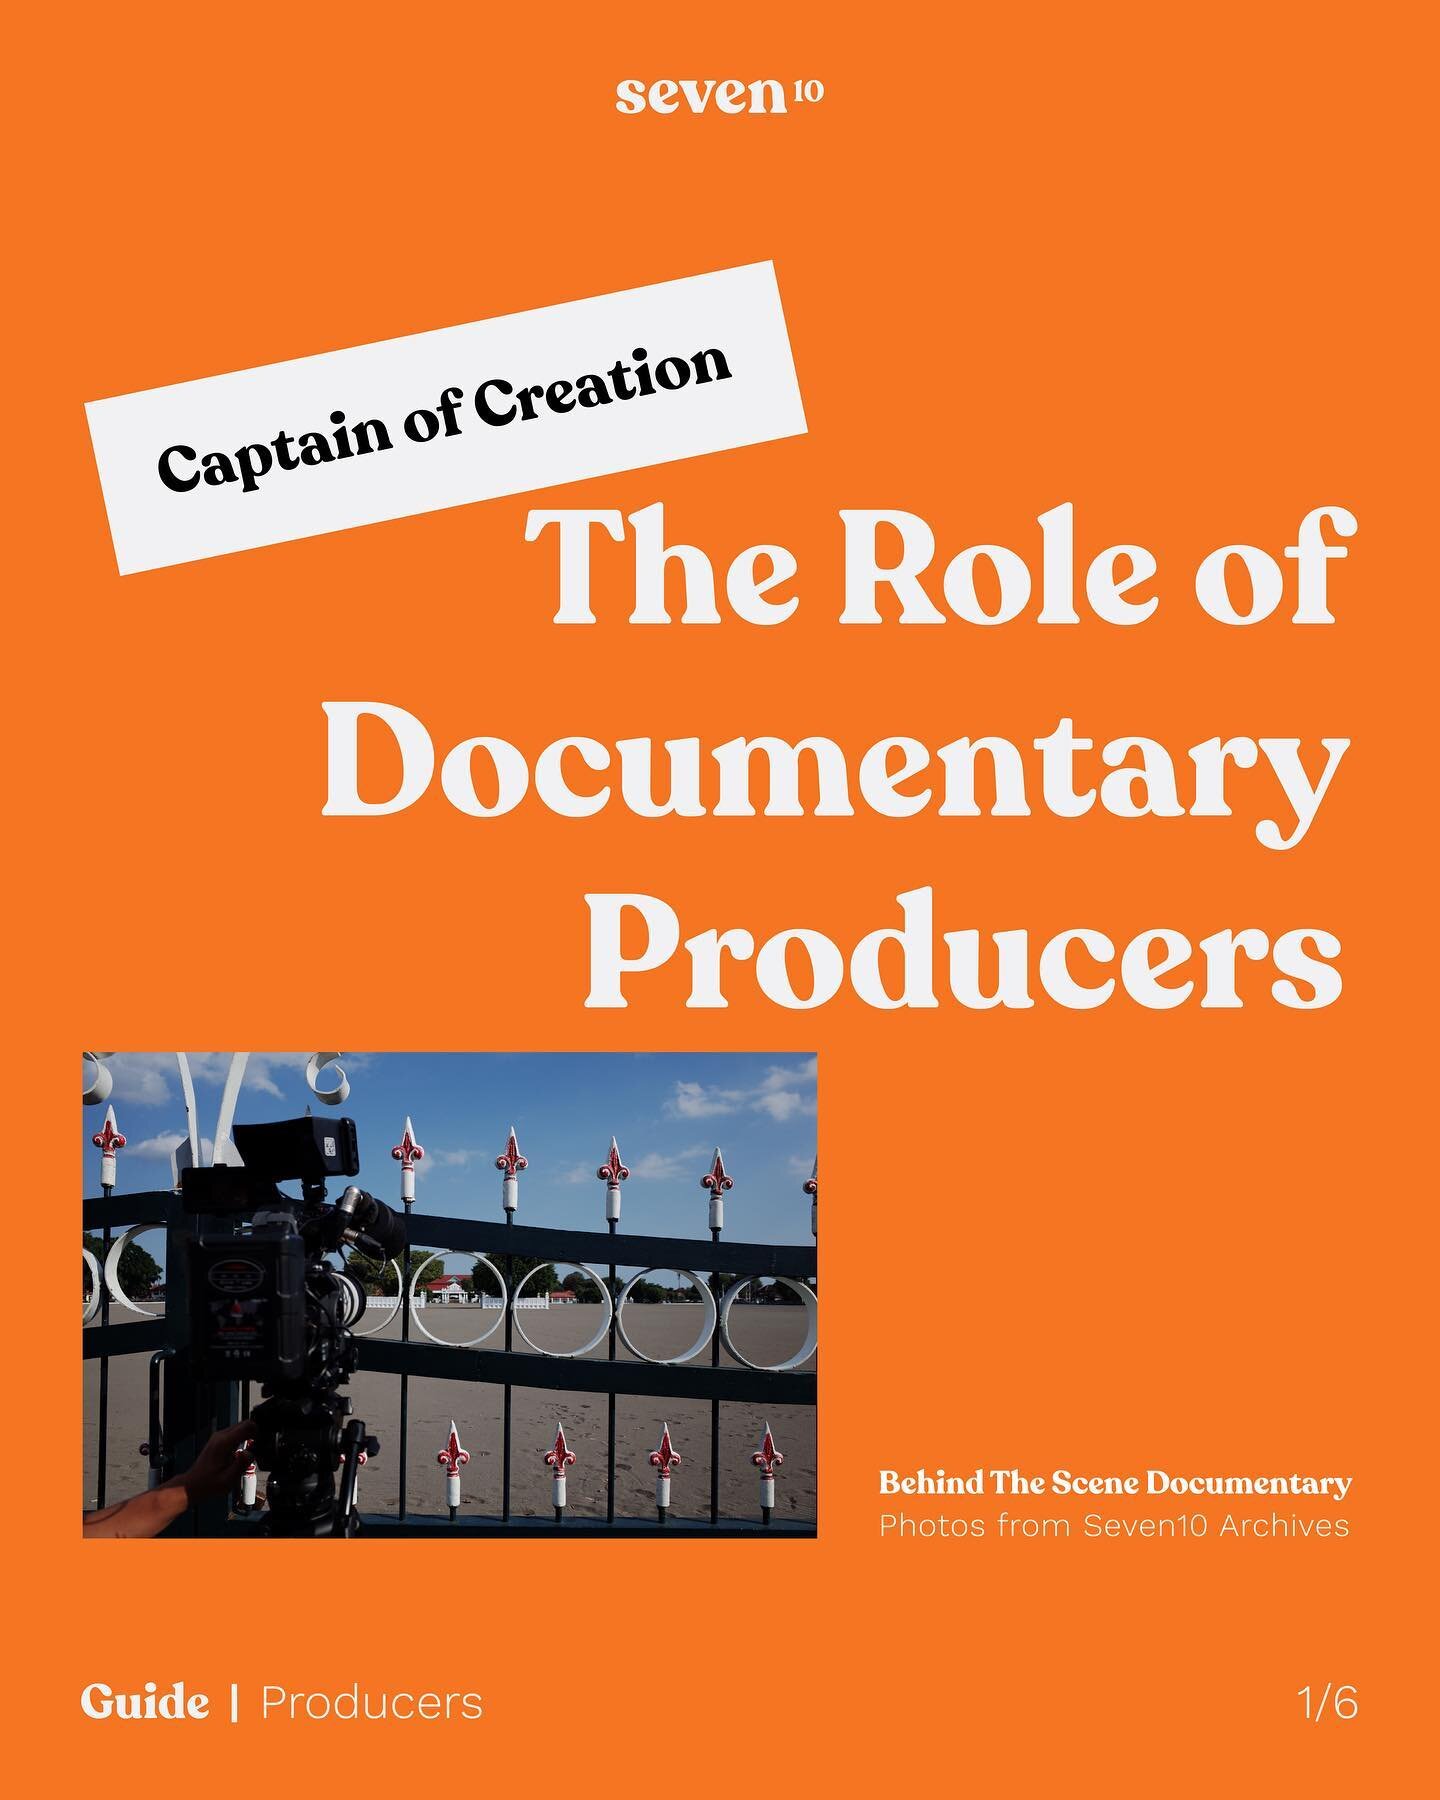 Documentary Producers are the visionaries leading behind the lens! Are you interested in becoming a producer? Or perhaps you already are one? Share your experiences in the comments below!

Stay tuned for our upcoming post where we uncover the various